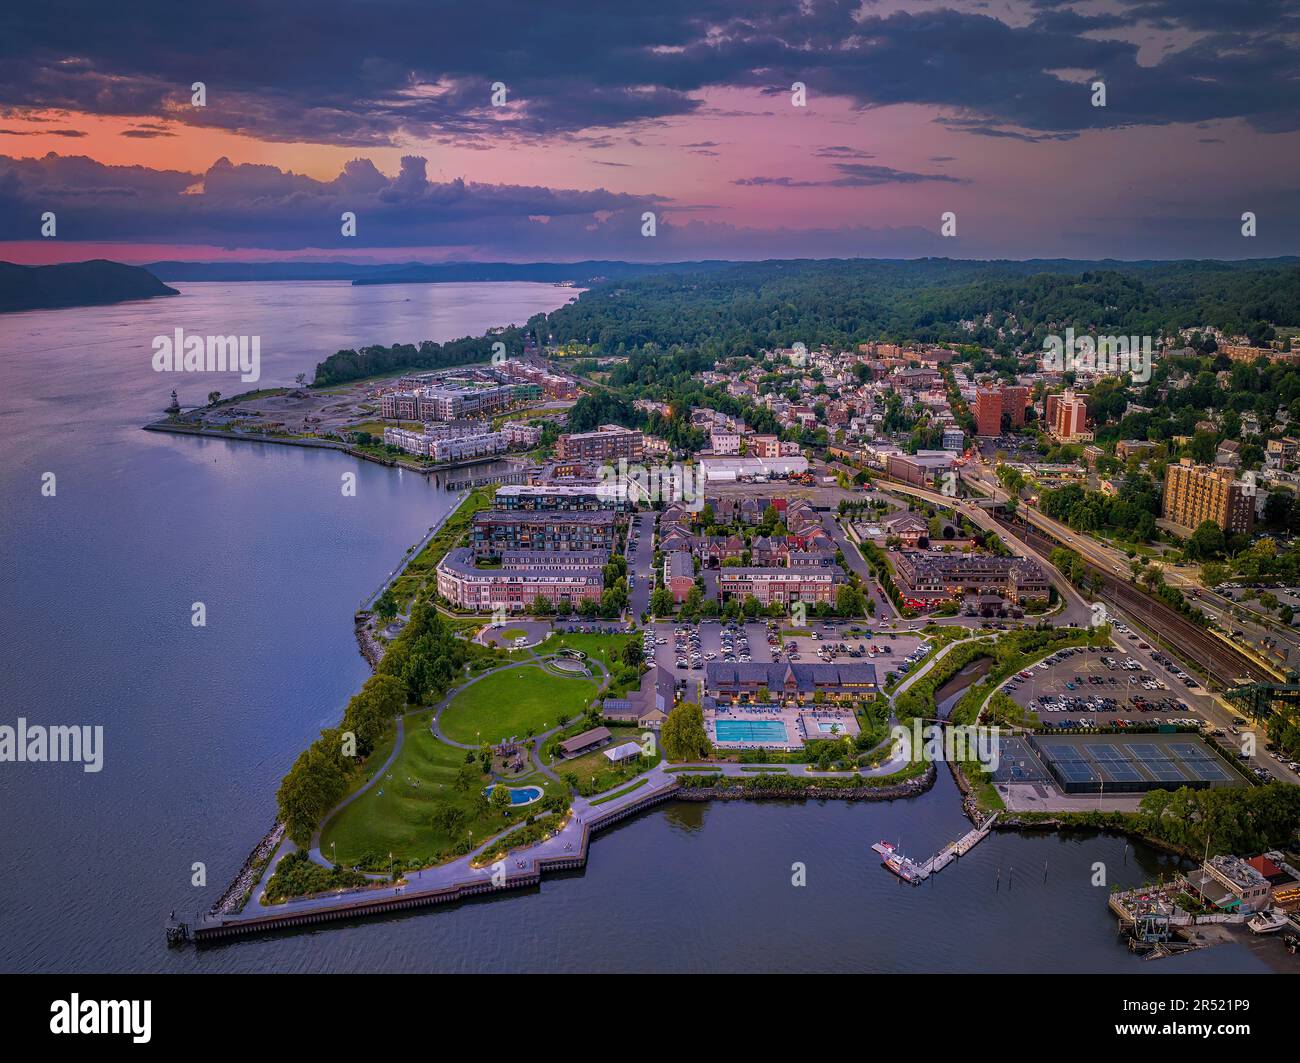 Sleepy Hollow Tarrytown NY - Aerial view during sunset.   The village of Tarrytown is in the town of Greenburgh in Westchester County, New York, Unite Stock Photo